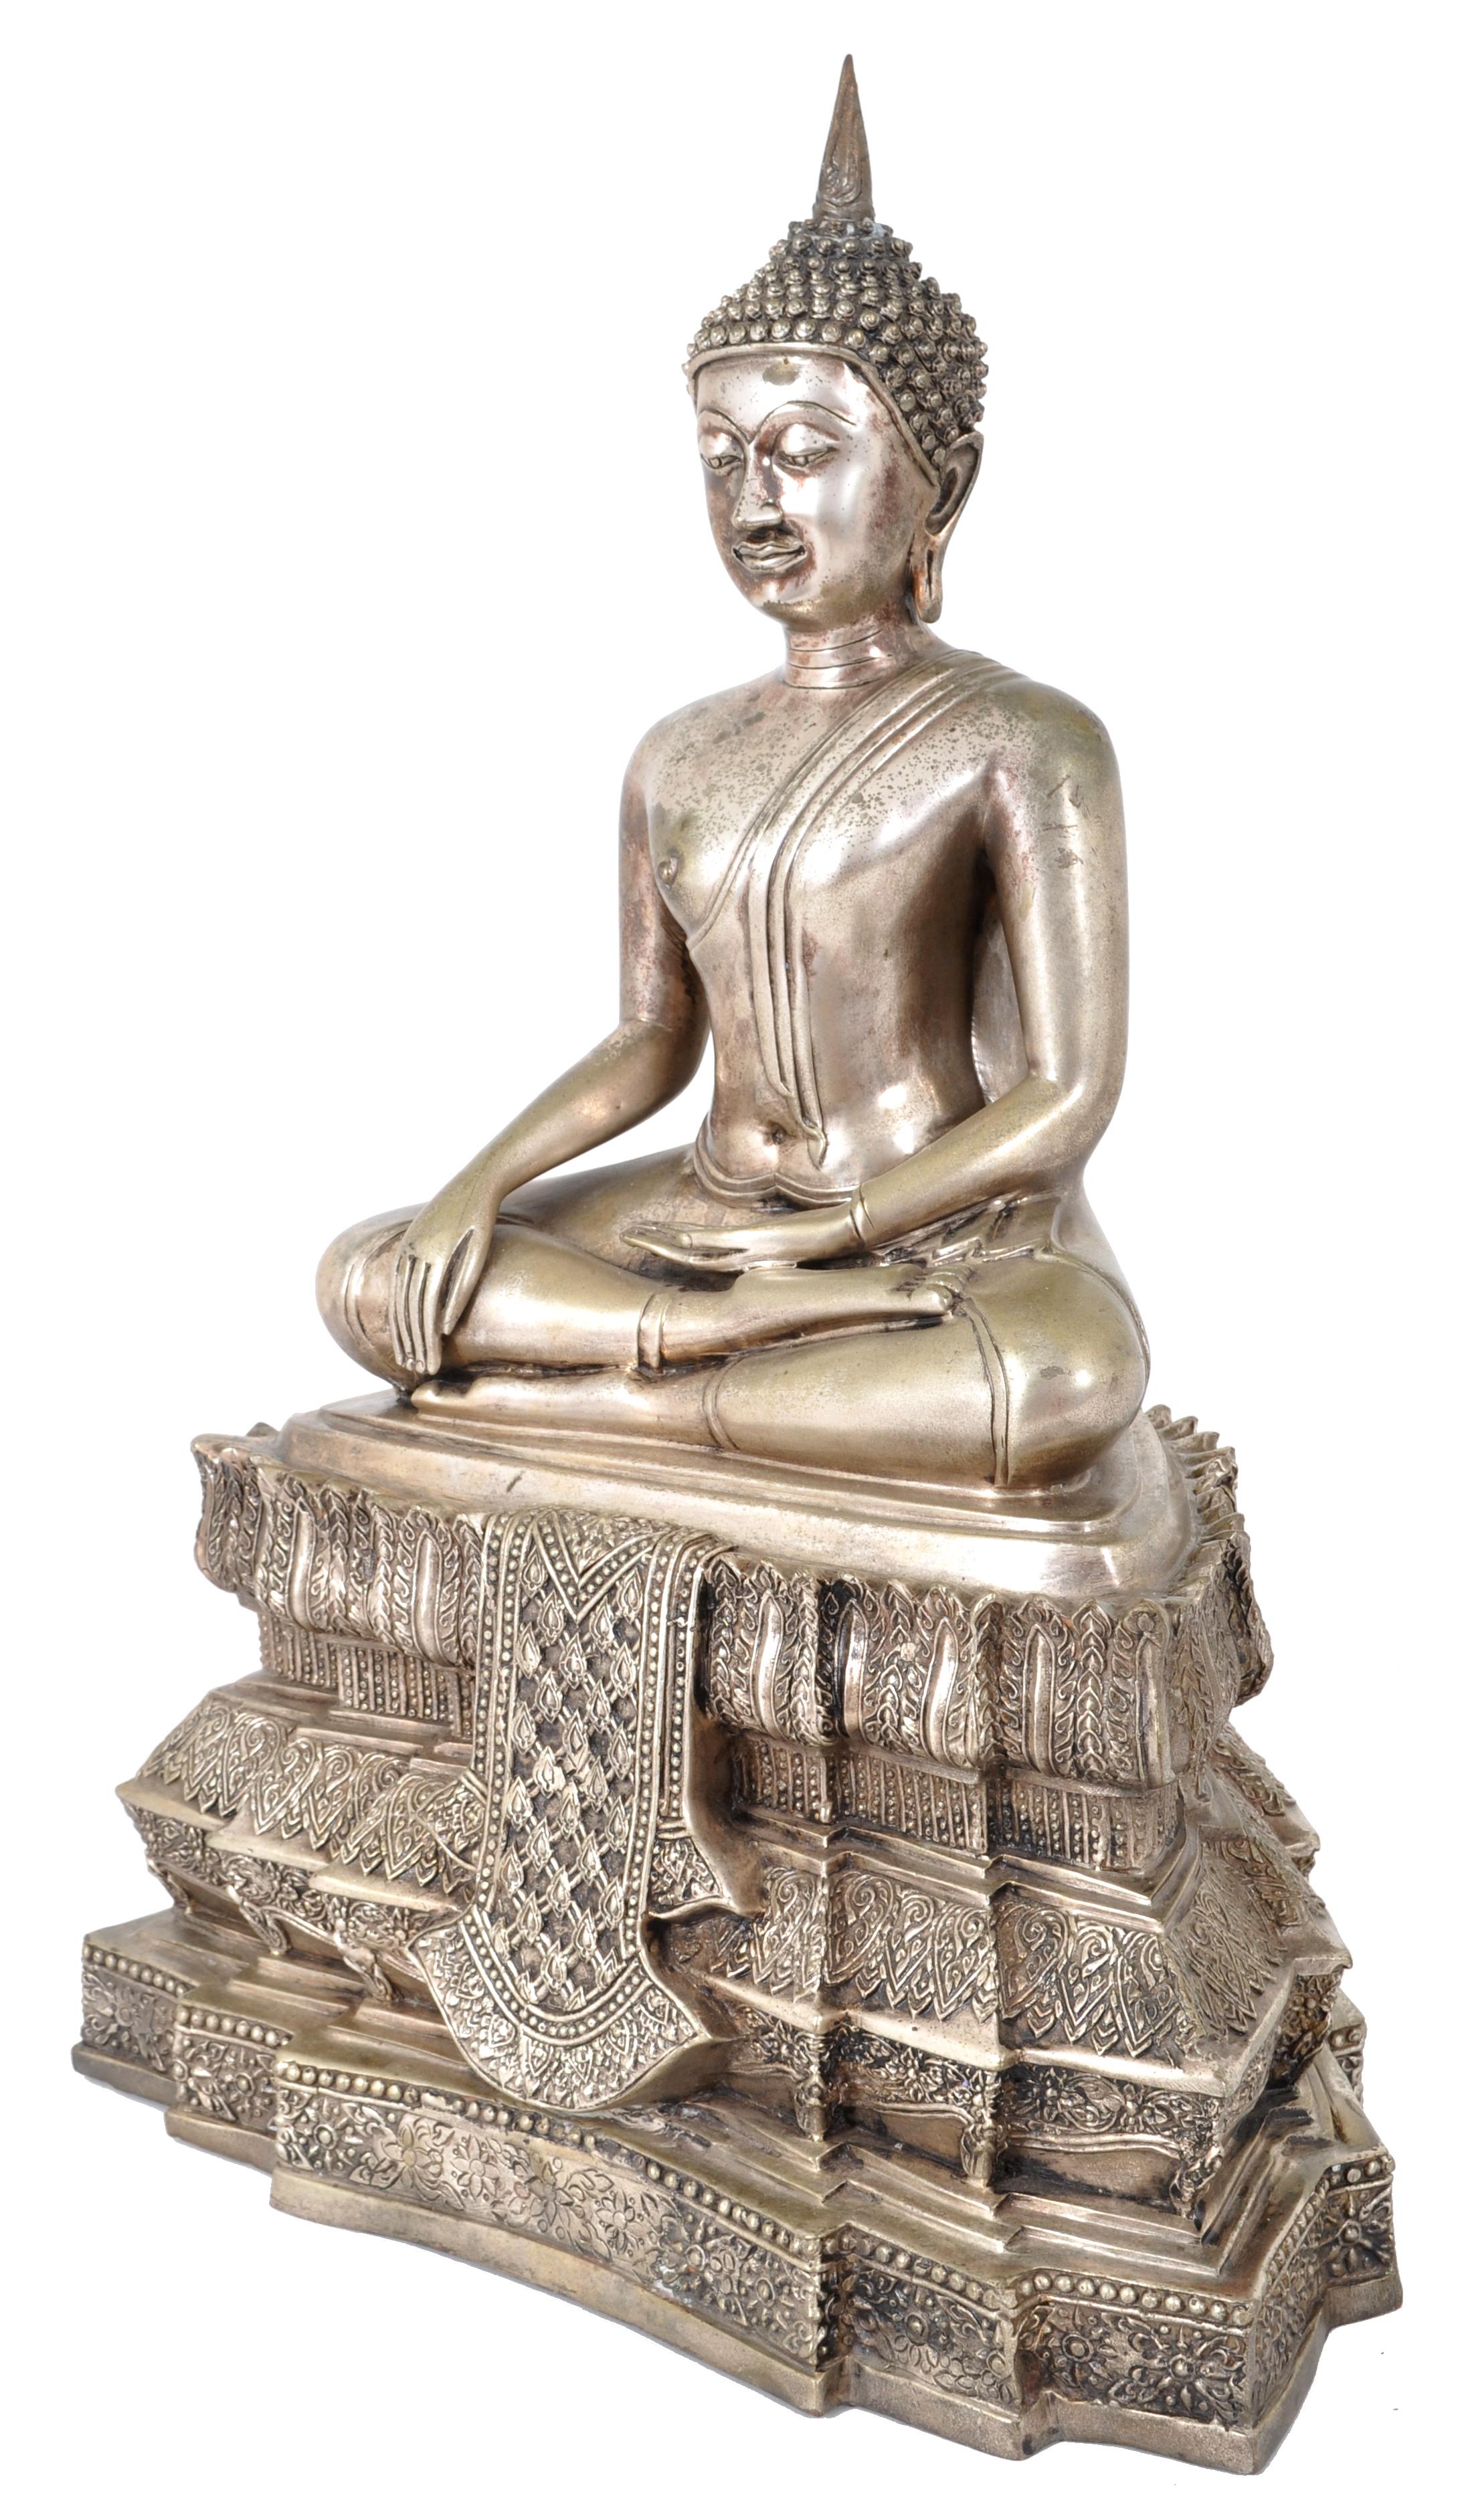 A fine and large antique silver-gilt bronze Tibetan statue of Buddha, circa 1850. The Buddha shown in Bhumisparsha mudra pose (touching the earth), having tight curls & a pointed ushnisha. The Buddha raised on an unusually tall & ornately engraved